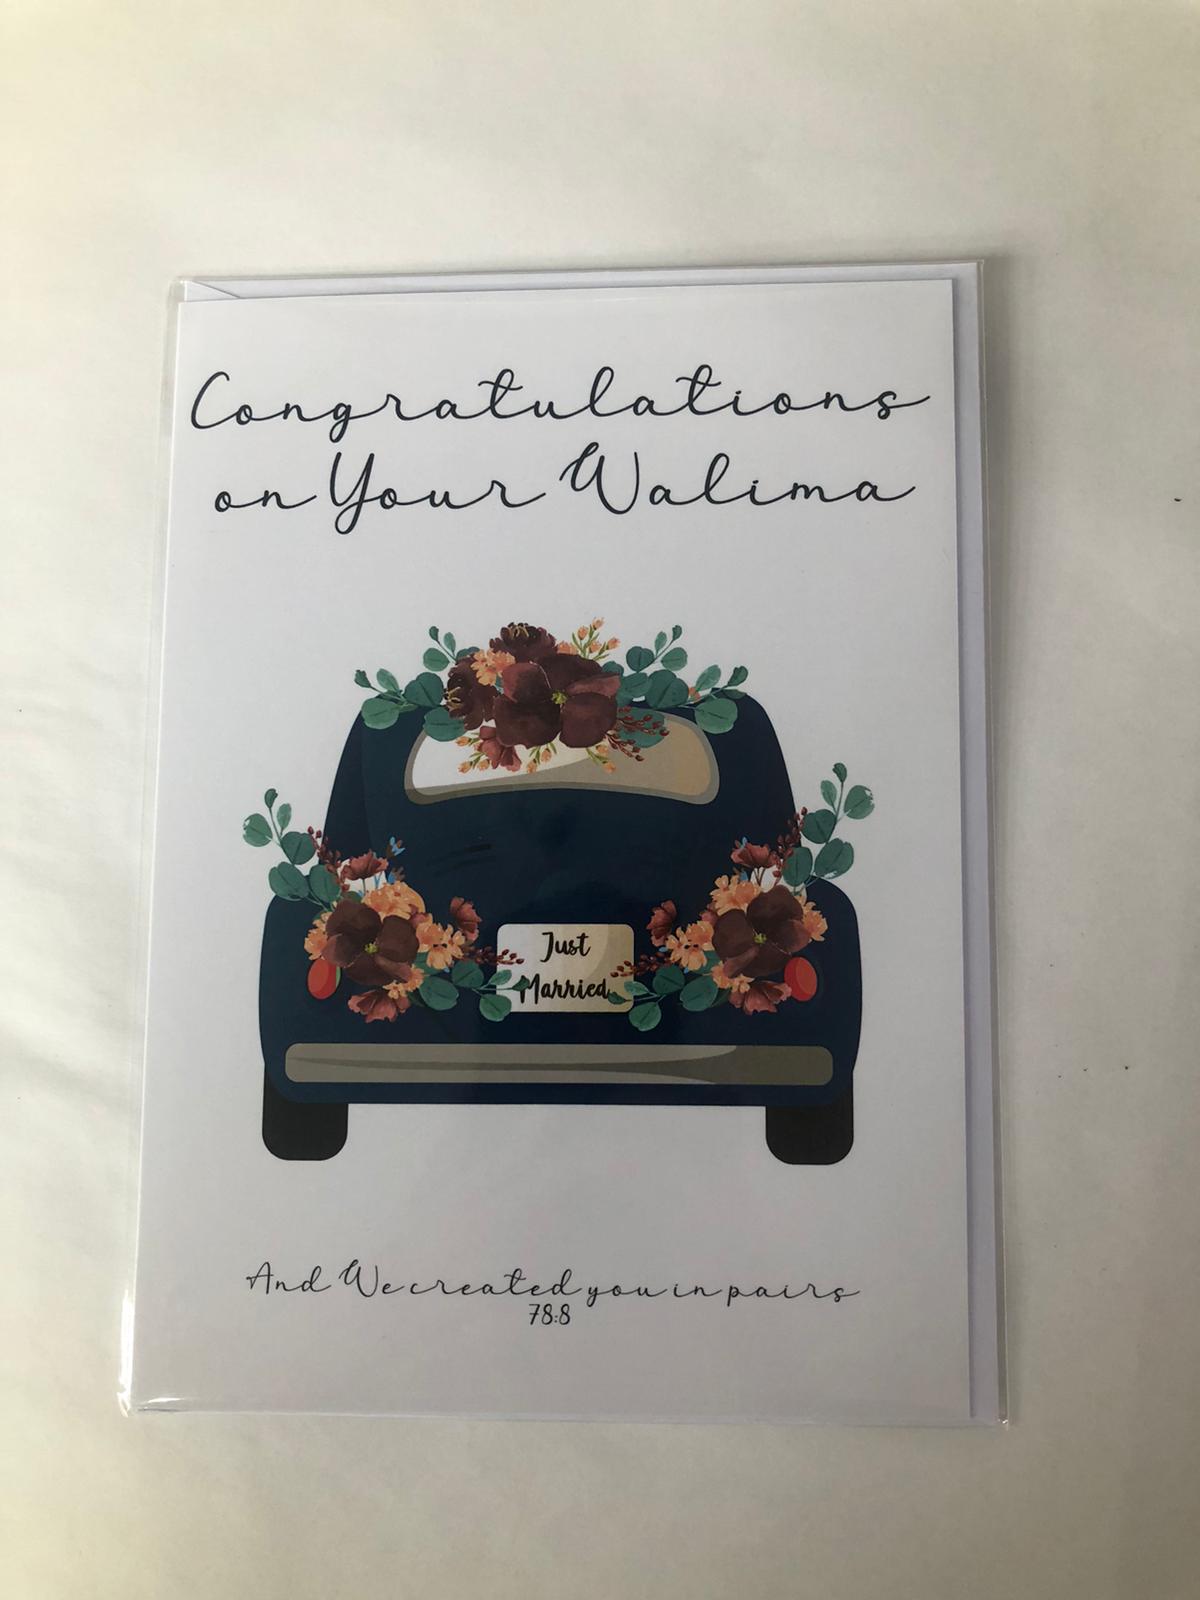 Gift Card for Congratulation on Reception